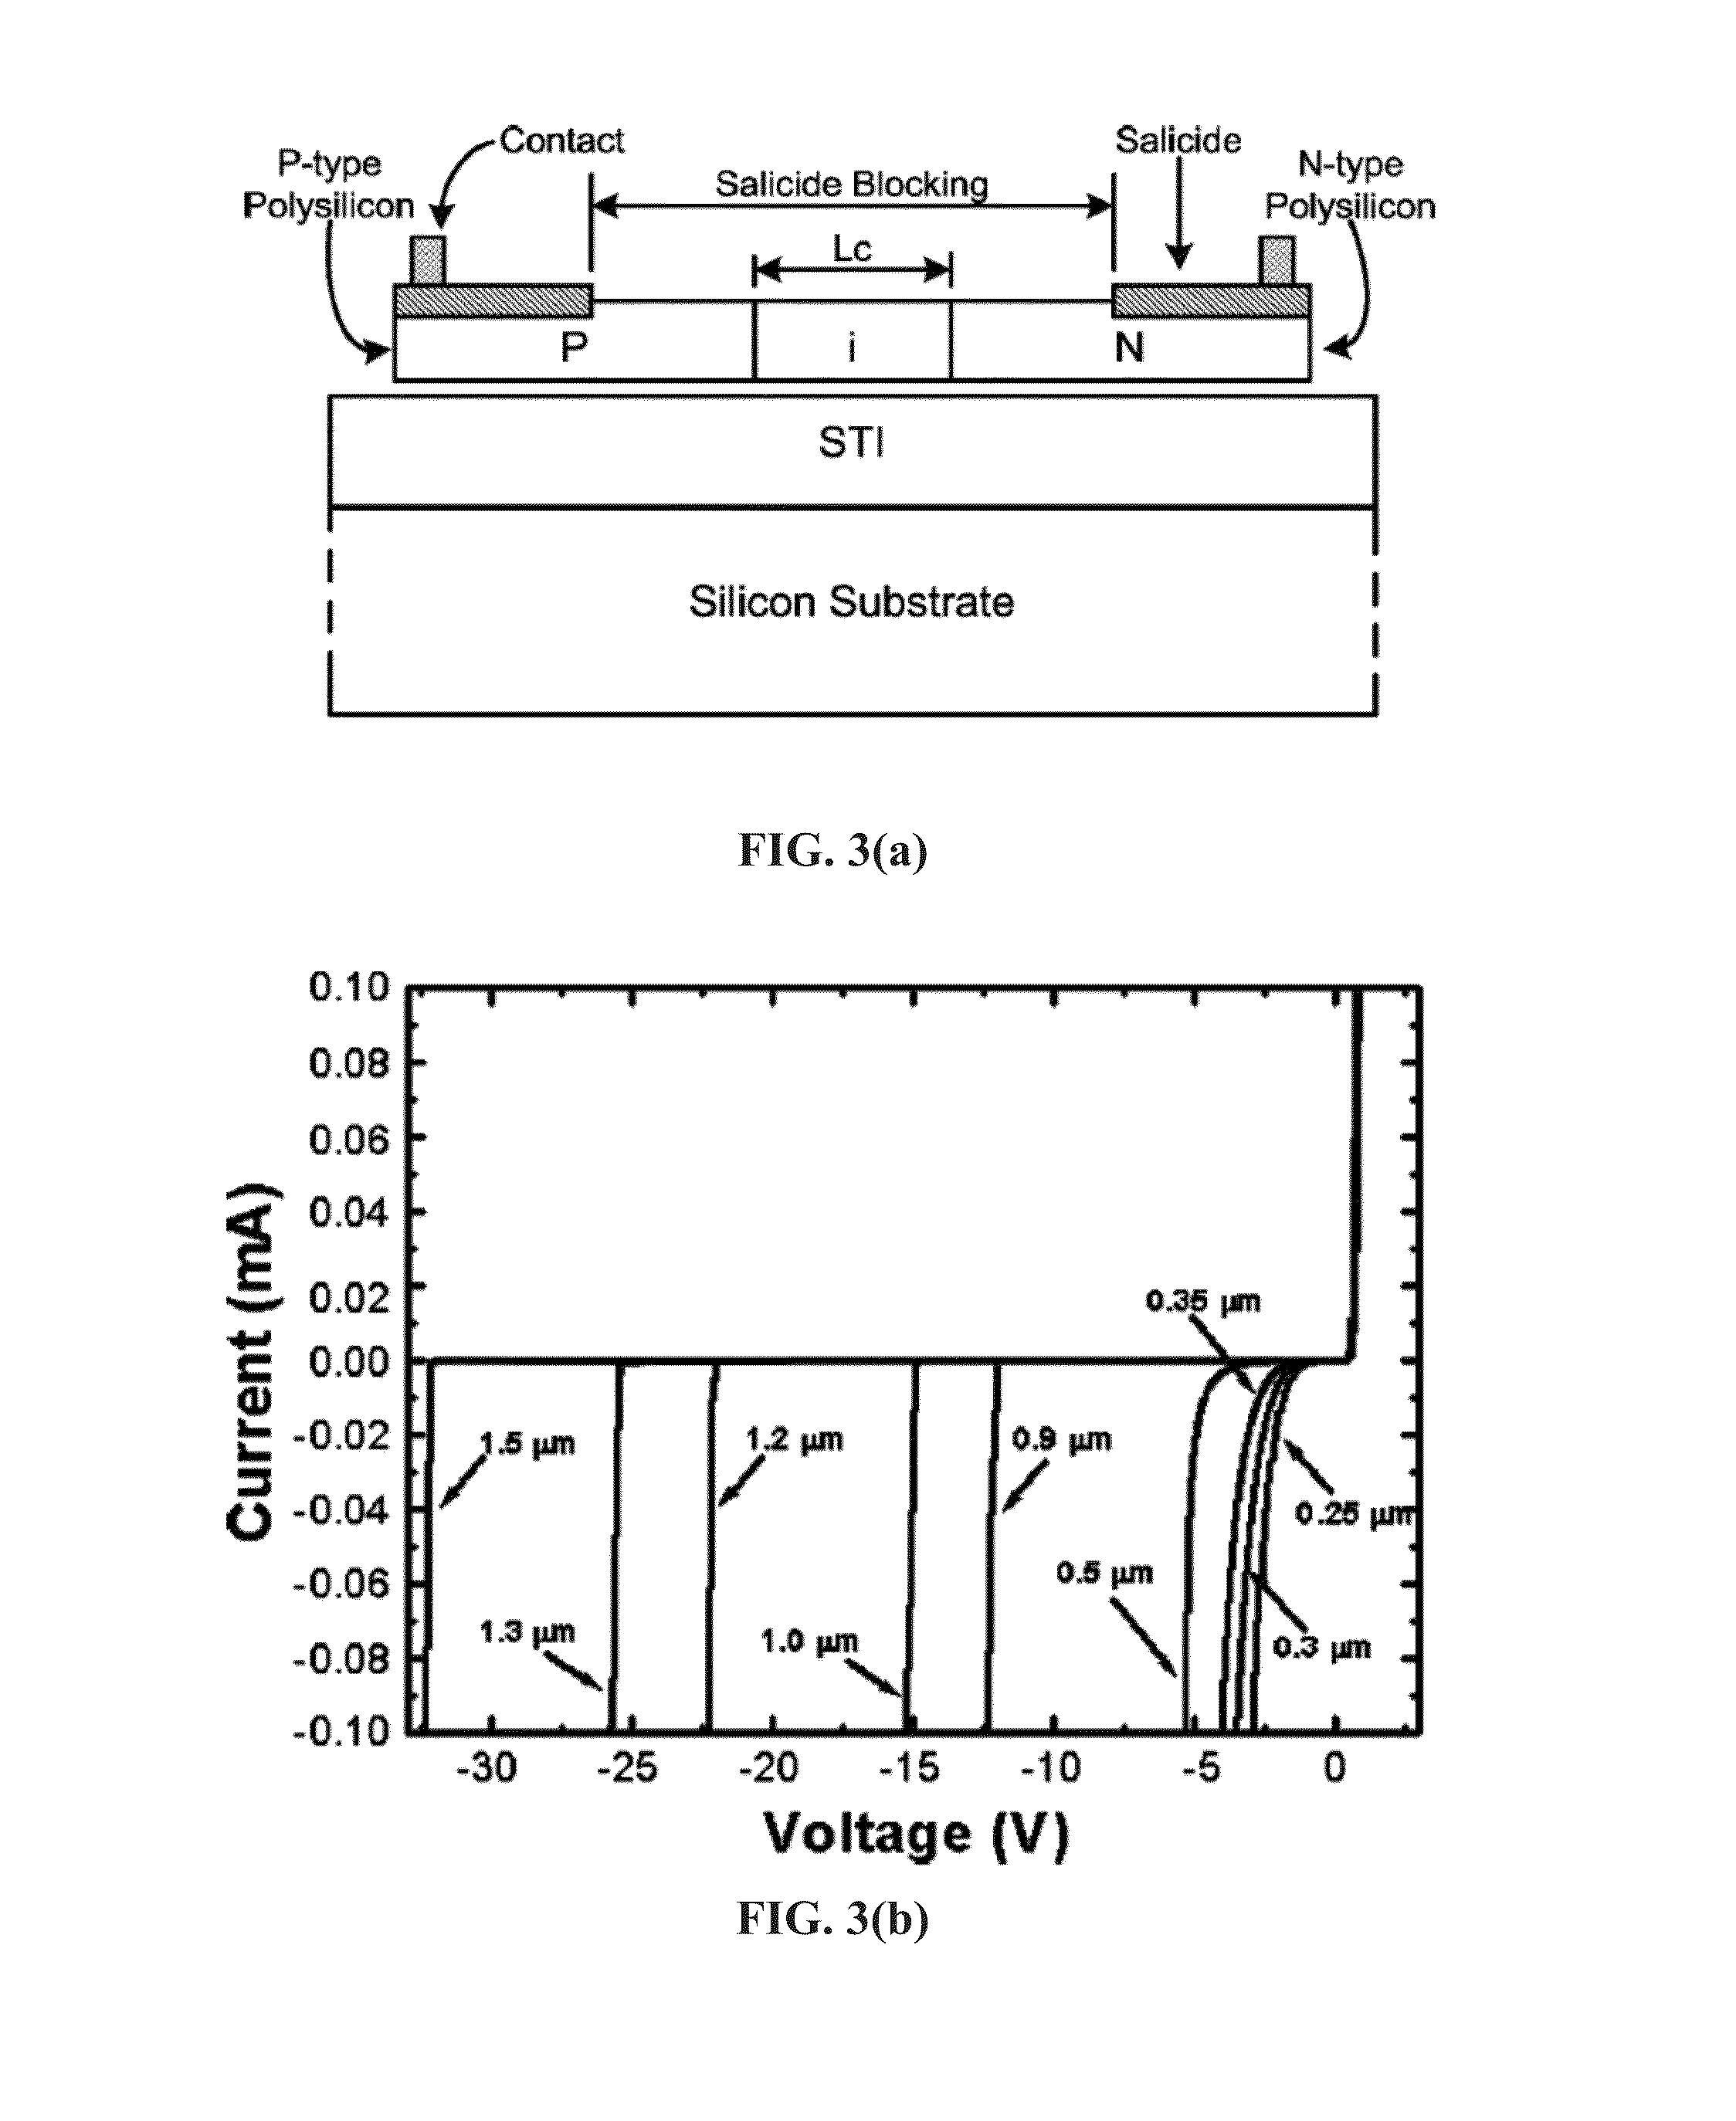 Structures and techniques for using semiconductor body to construct SCR, DIAC, or triac